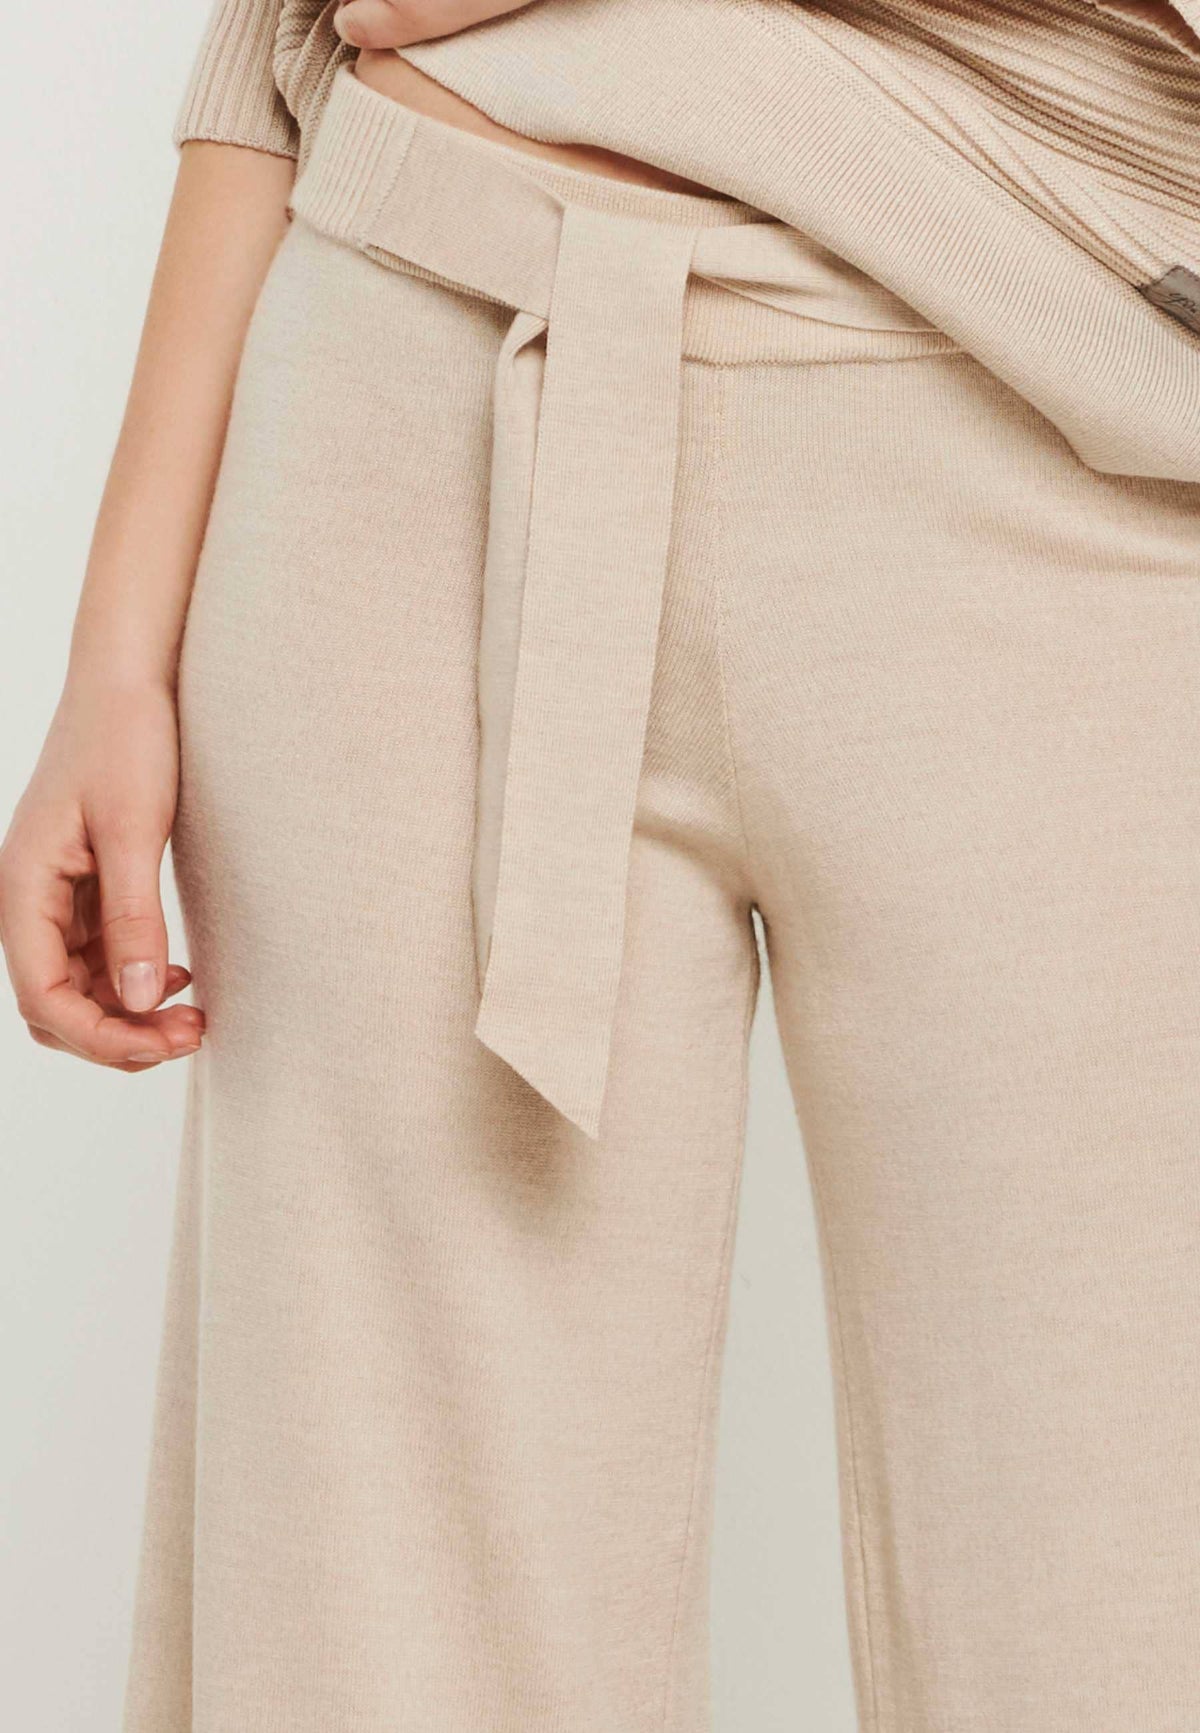 PANTS BAILEY - Wide Relaxing Pants for Women: M / Taupe